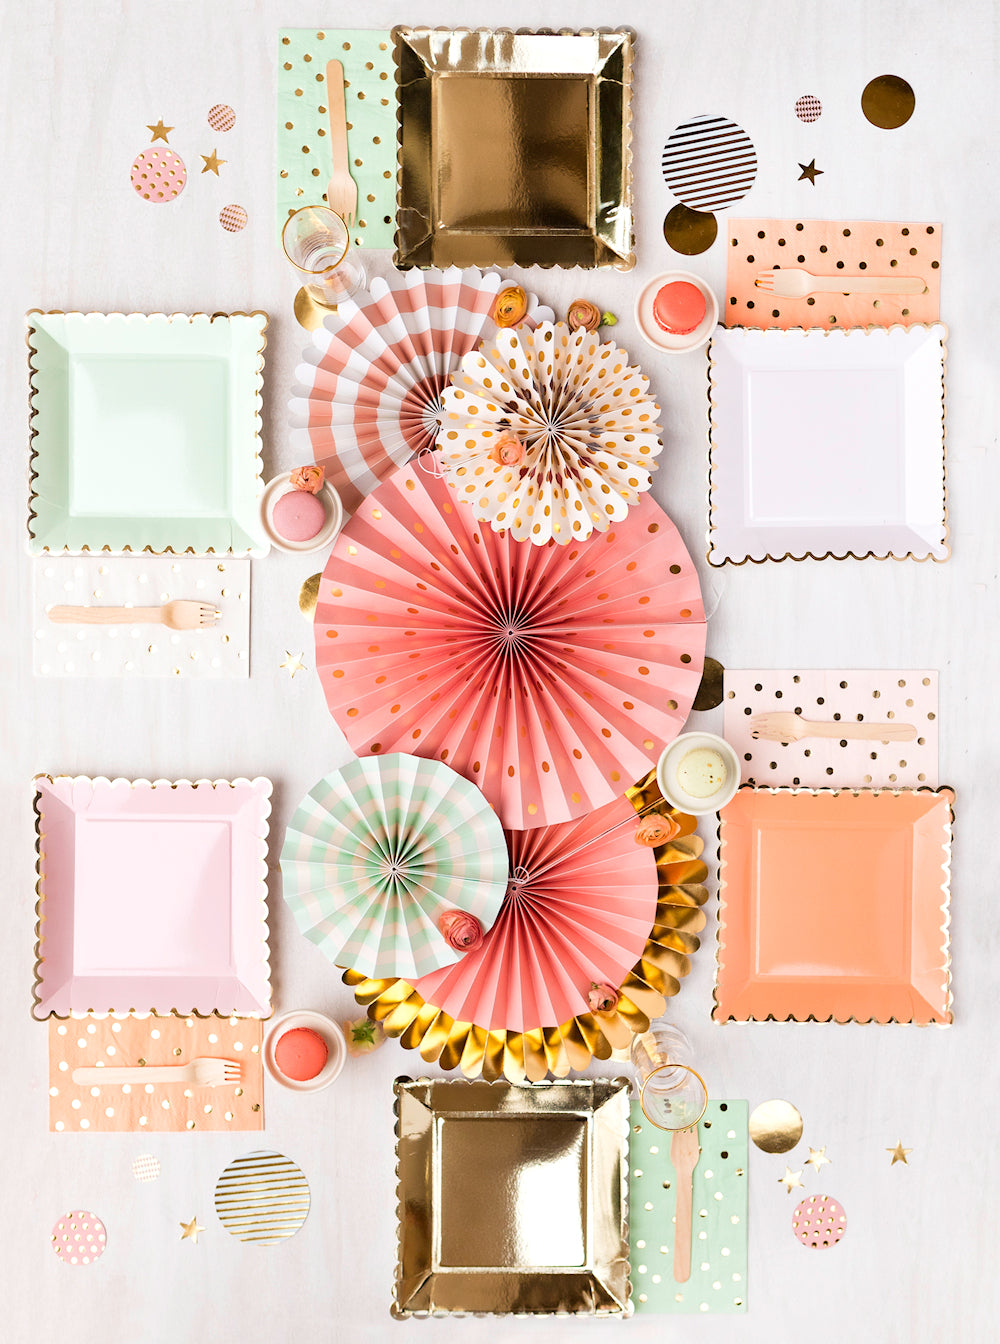 Tall Coral Napkins with Gold Polka Dots | www.sprinklebeesweet.com